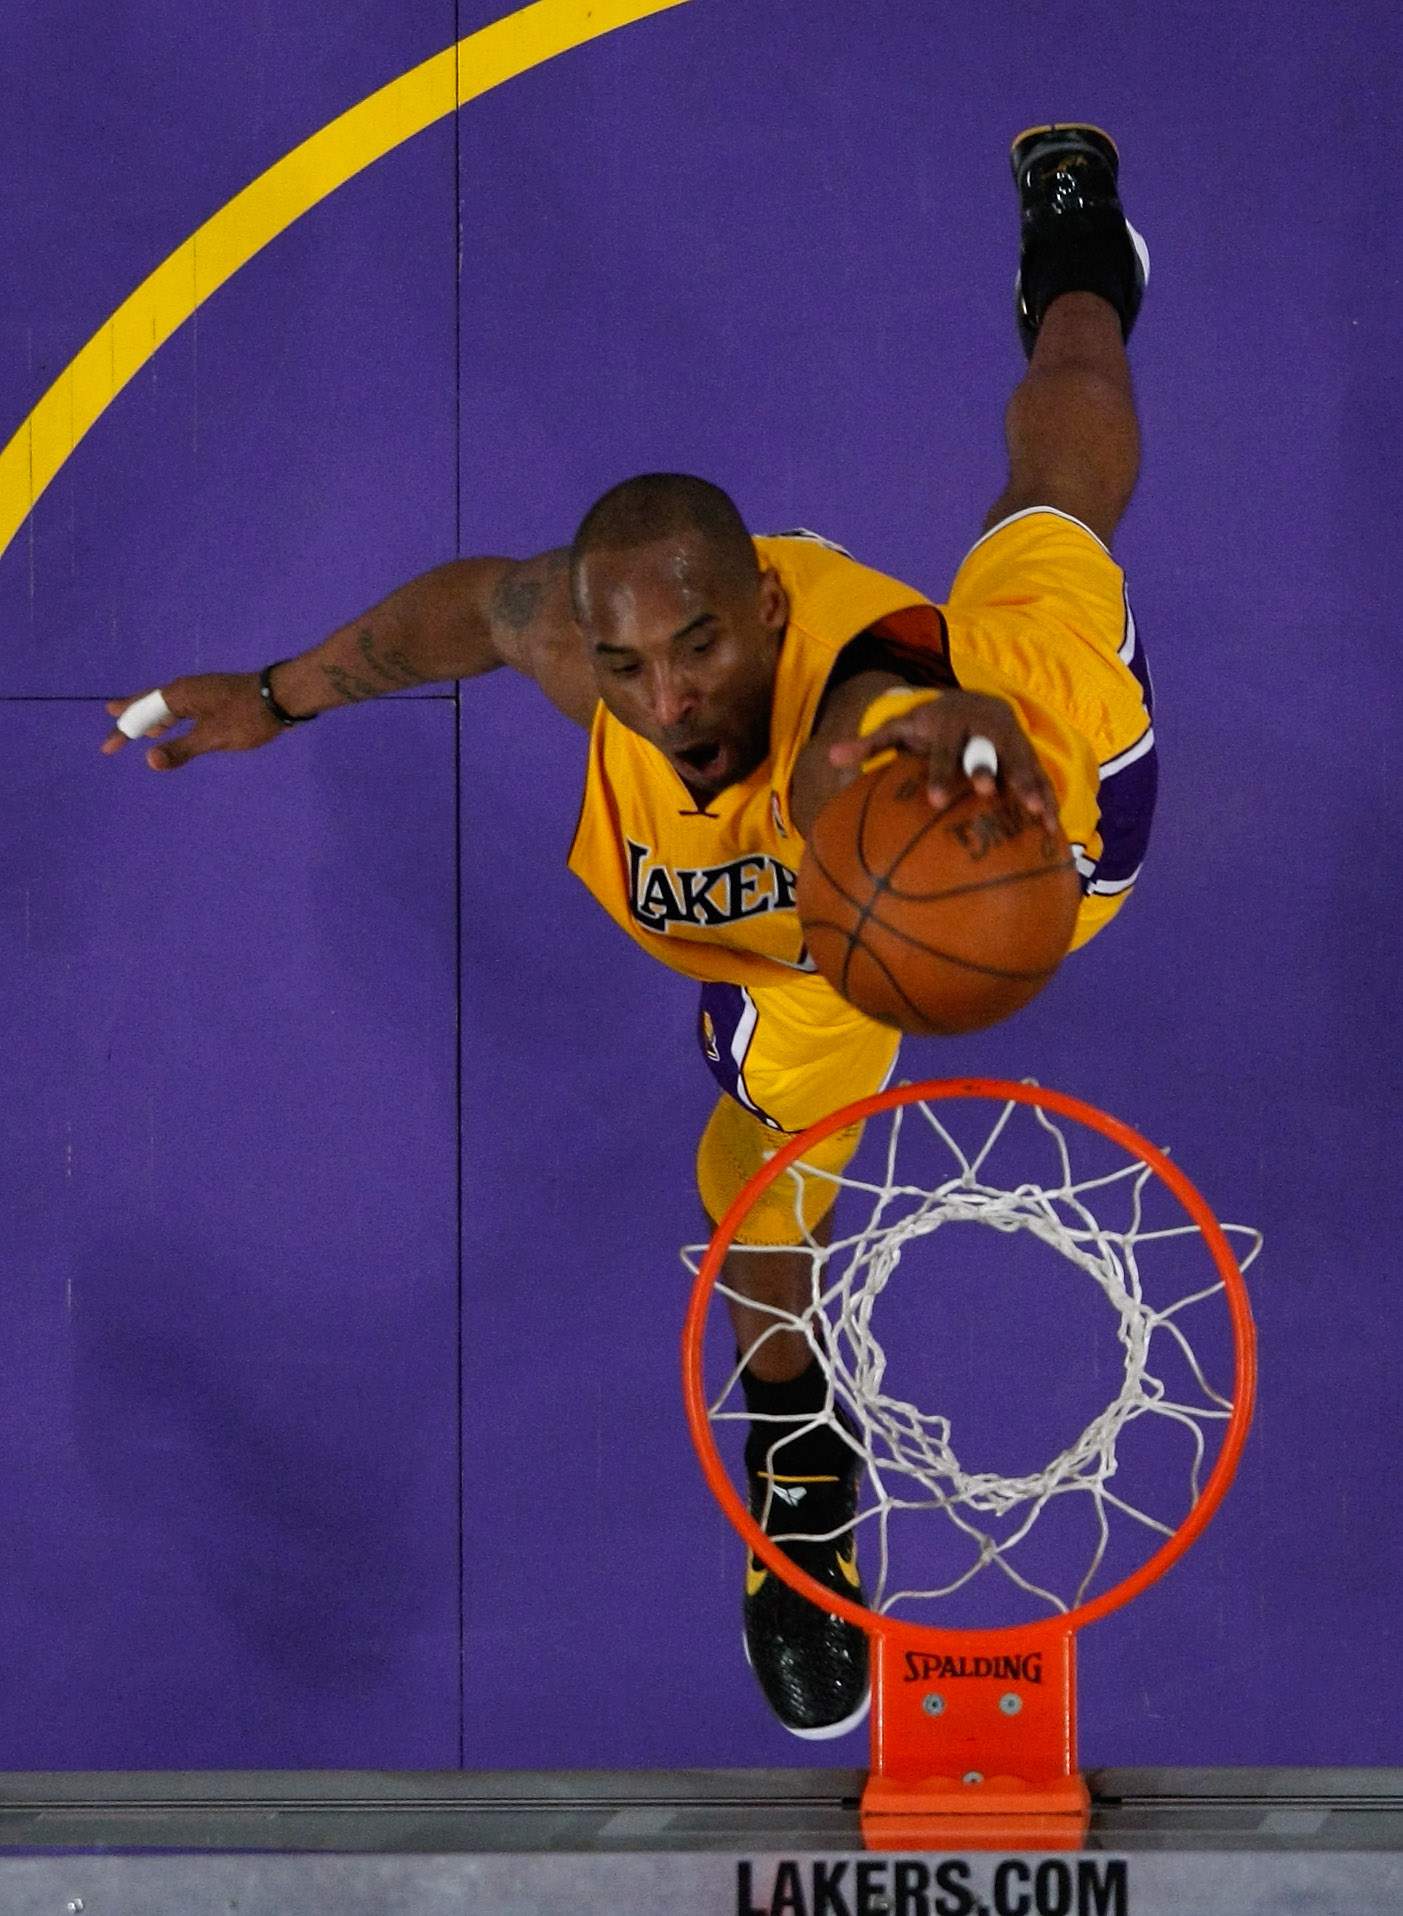 Kobe Bryant dunks with his left hand in the third quarter against the New Orleans Hornets in Game 5 of the Western Conference Quarterfinals in the 2011 NBA Playoffs.